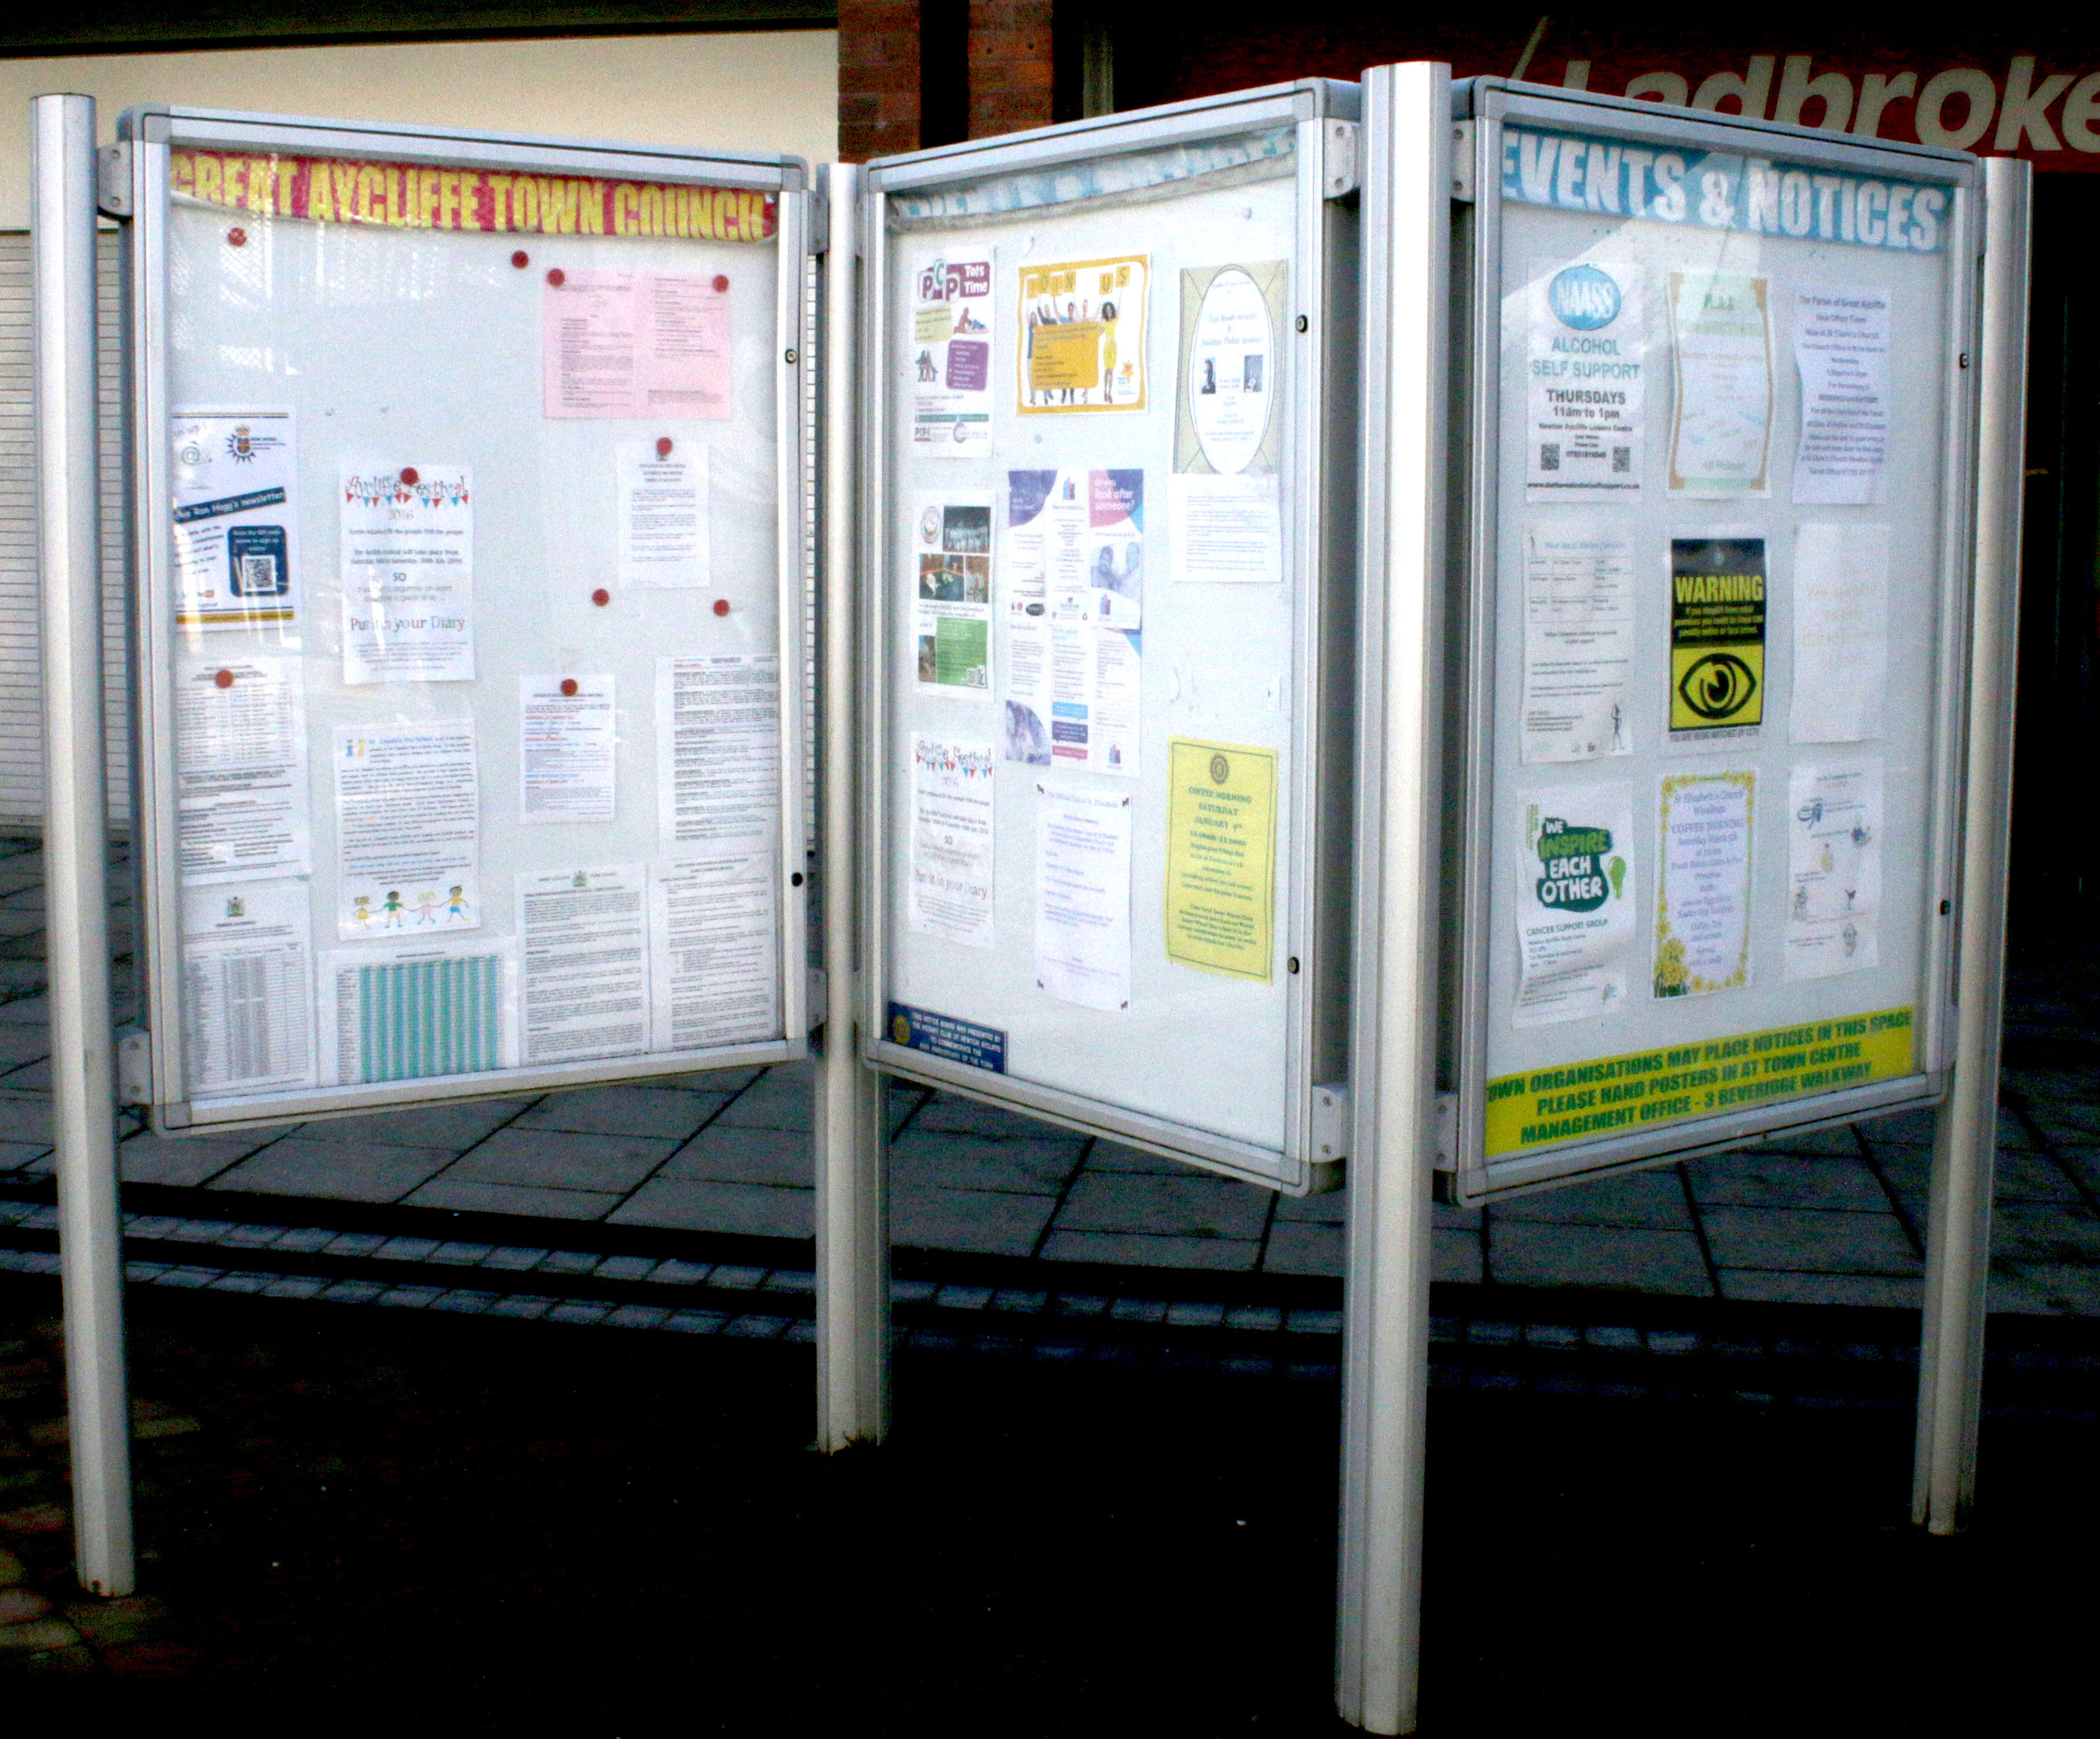 Notice Board for Use of Town Organisations